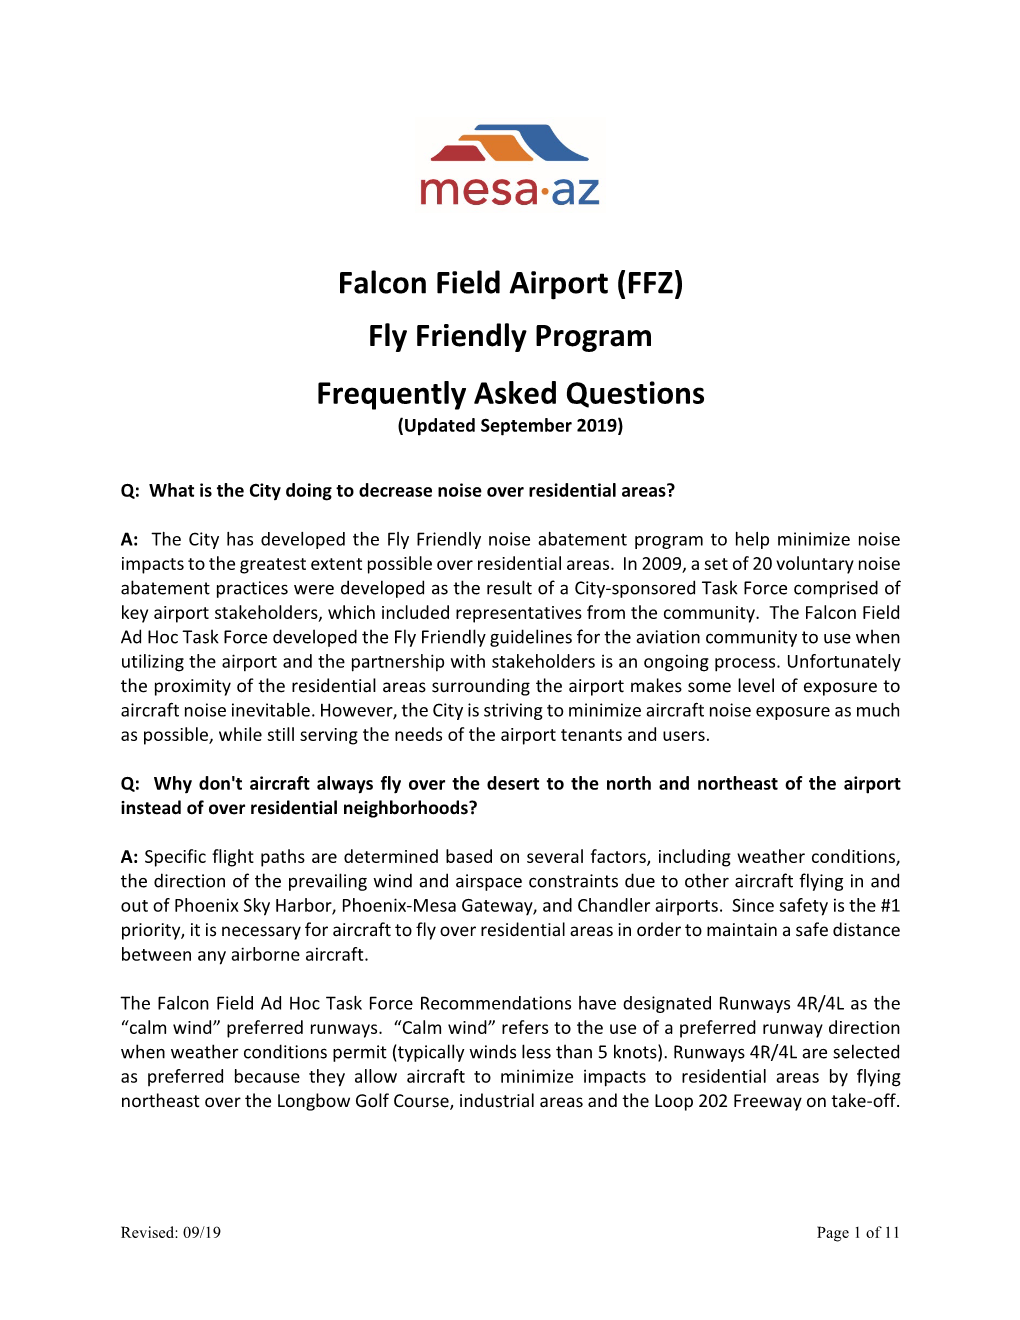 Falcon Field Airport (FFZ) Fly Friendly Program Frequently Asked Questions